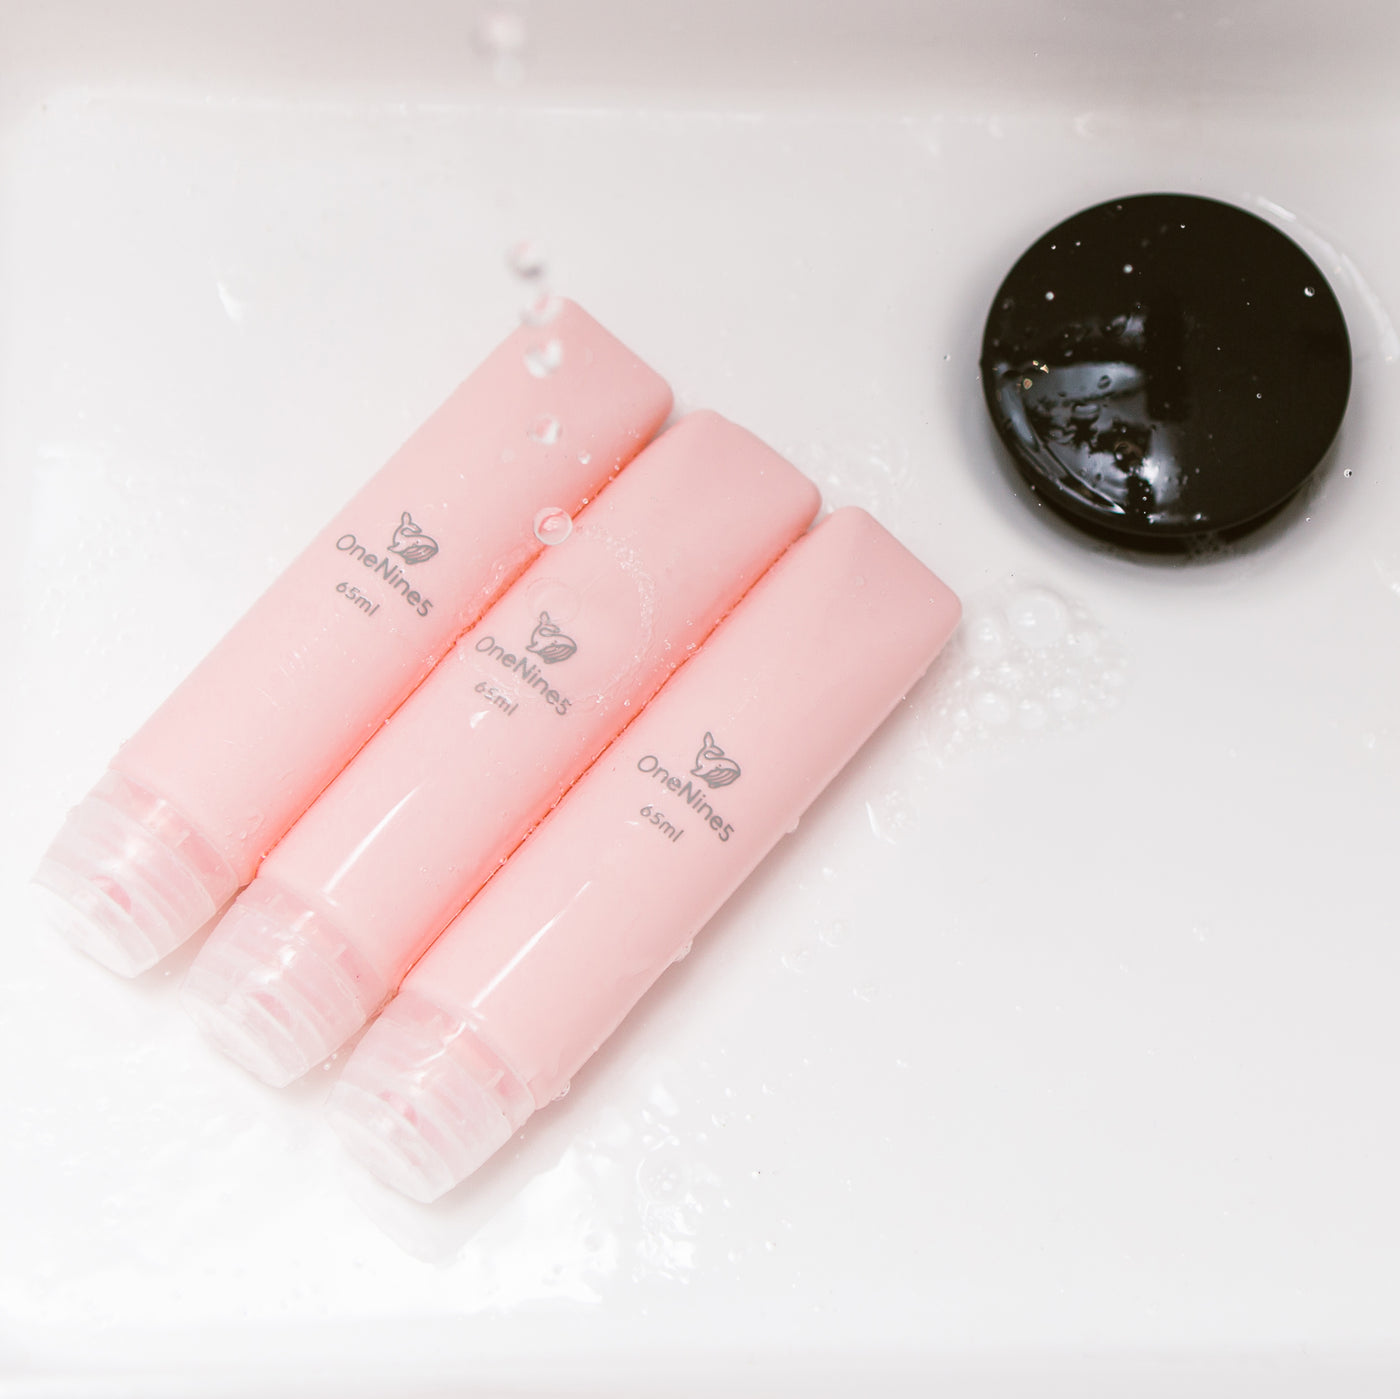 three pink silicone travel bottles in the bathroom sink. A grey OneNine5 logo is visible on the reusable bottles and they are being splashed with water